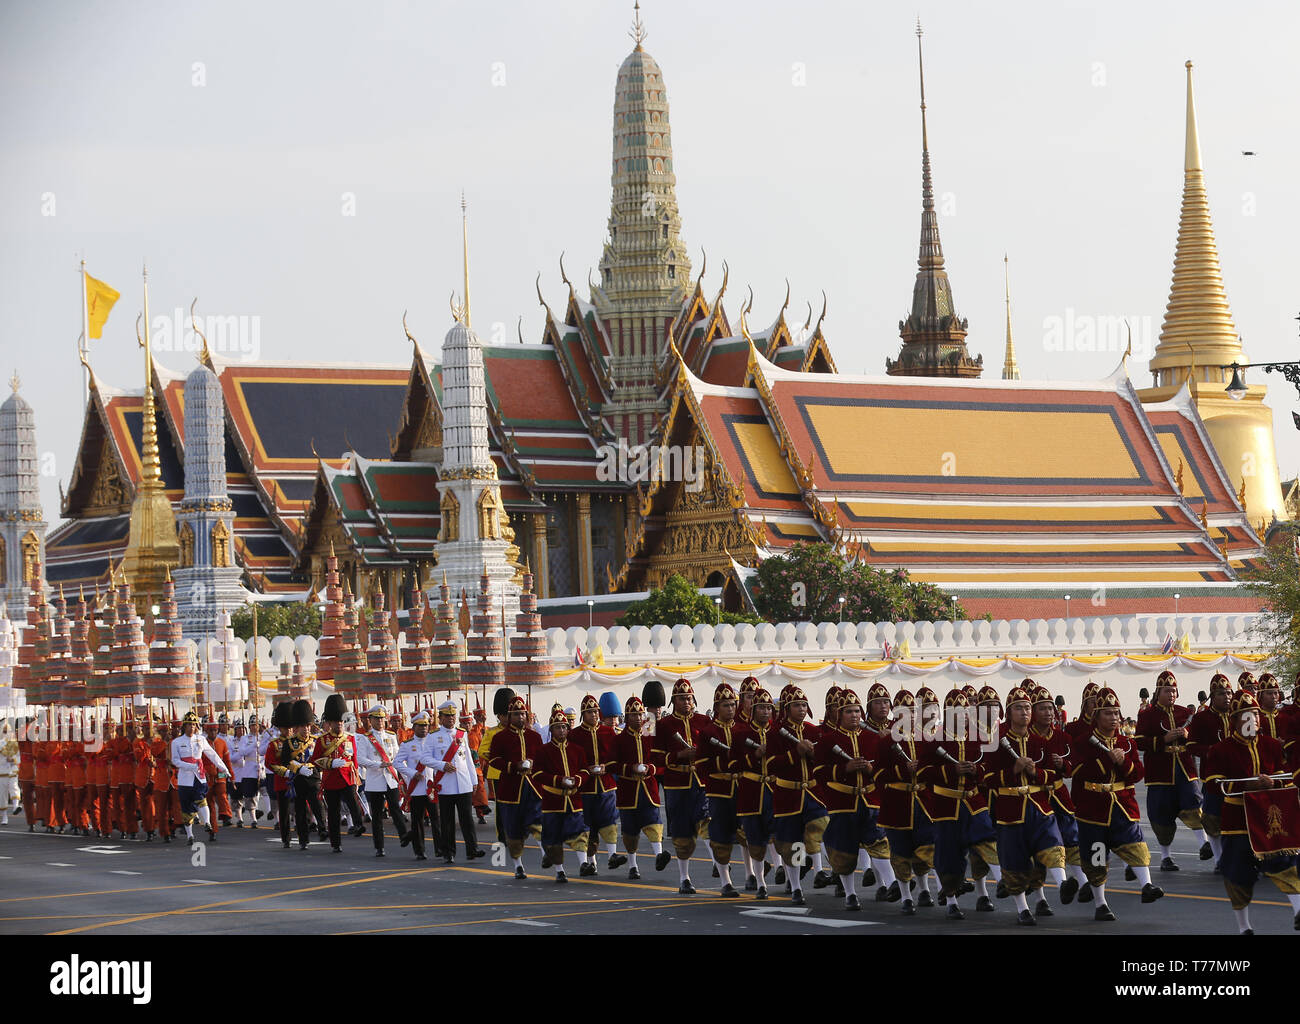 Bangkok, Thailand. 5th May, 2019. Royal guards seen marching during Thailand's King Maha Vajiralongkorn Bodindradebayavarangkun (Rama X) coronation procession on land to encircle the city to give the people the opportunity to attend and pay homage to their new King. Credit: Chaiwat Subprasom/SOPA Images/ZUMA Wire/Alamy Live News Stock Photo